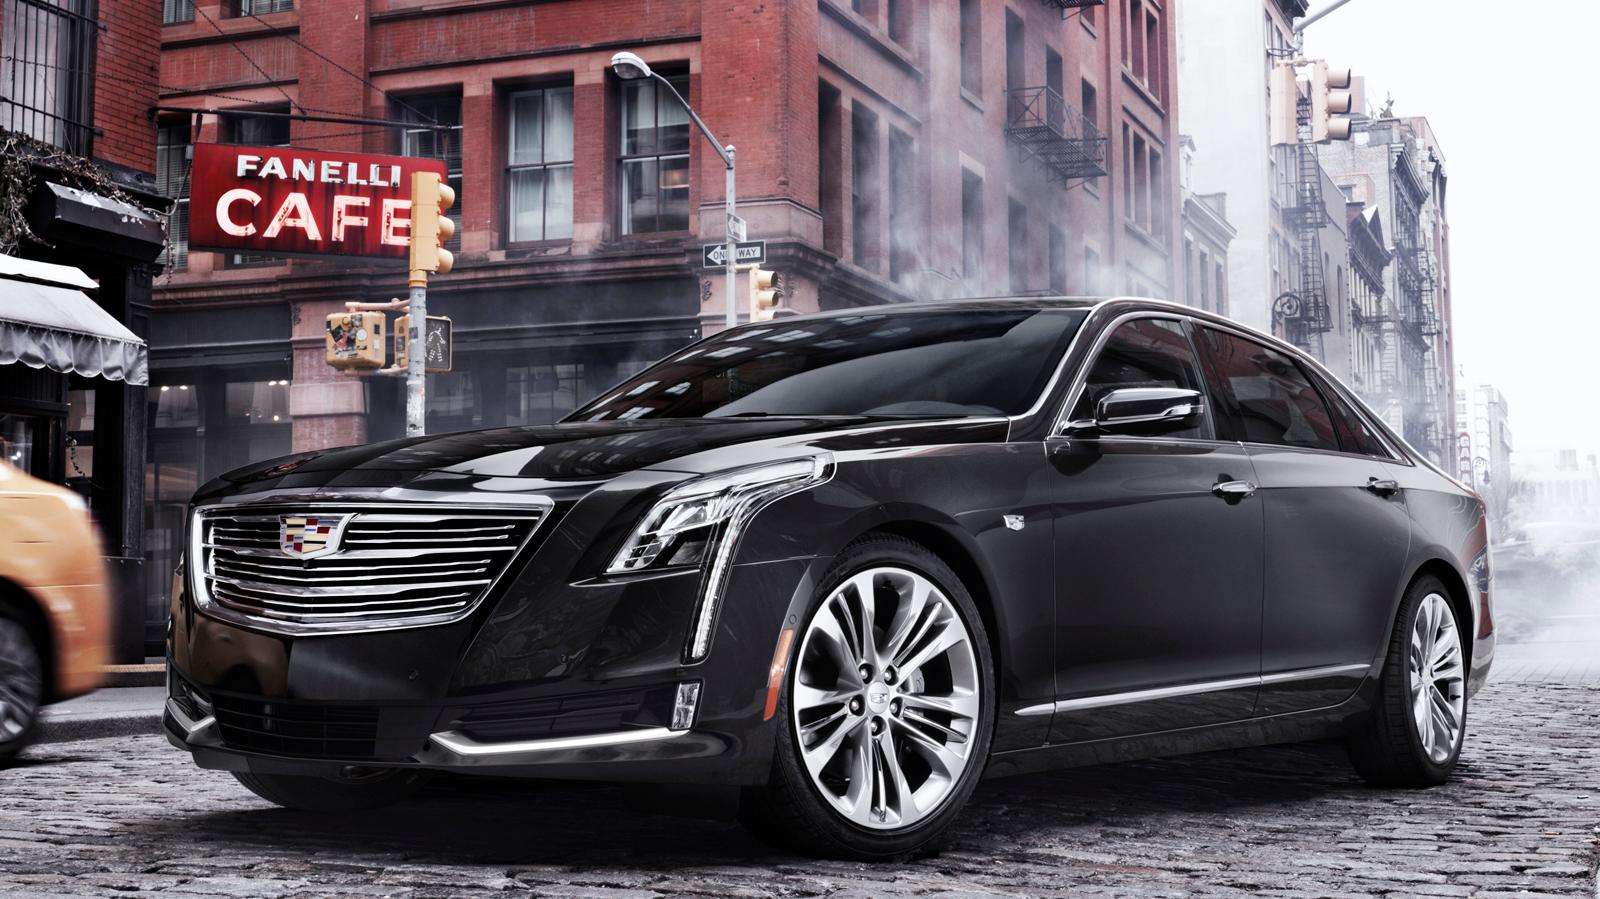 Contact Cable Dahmer Cadillac of Kansas City to Service Your 2017 Cadillac CT6